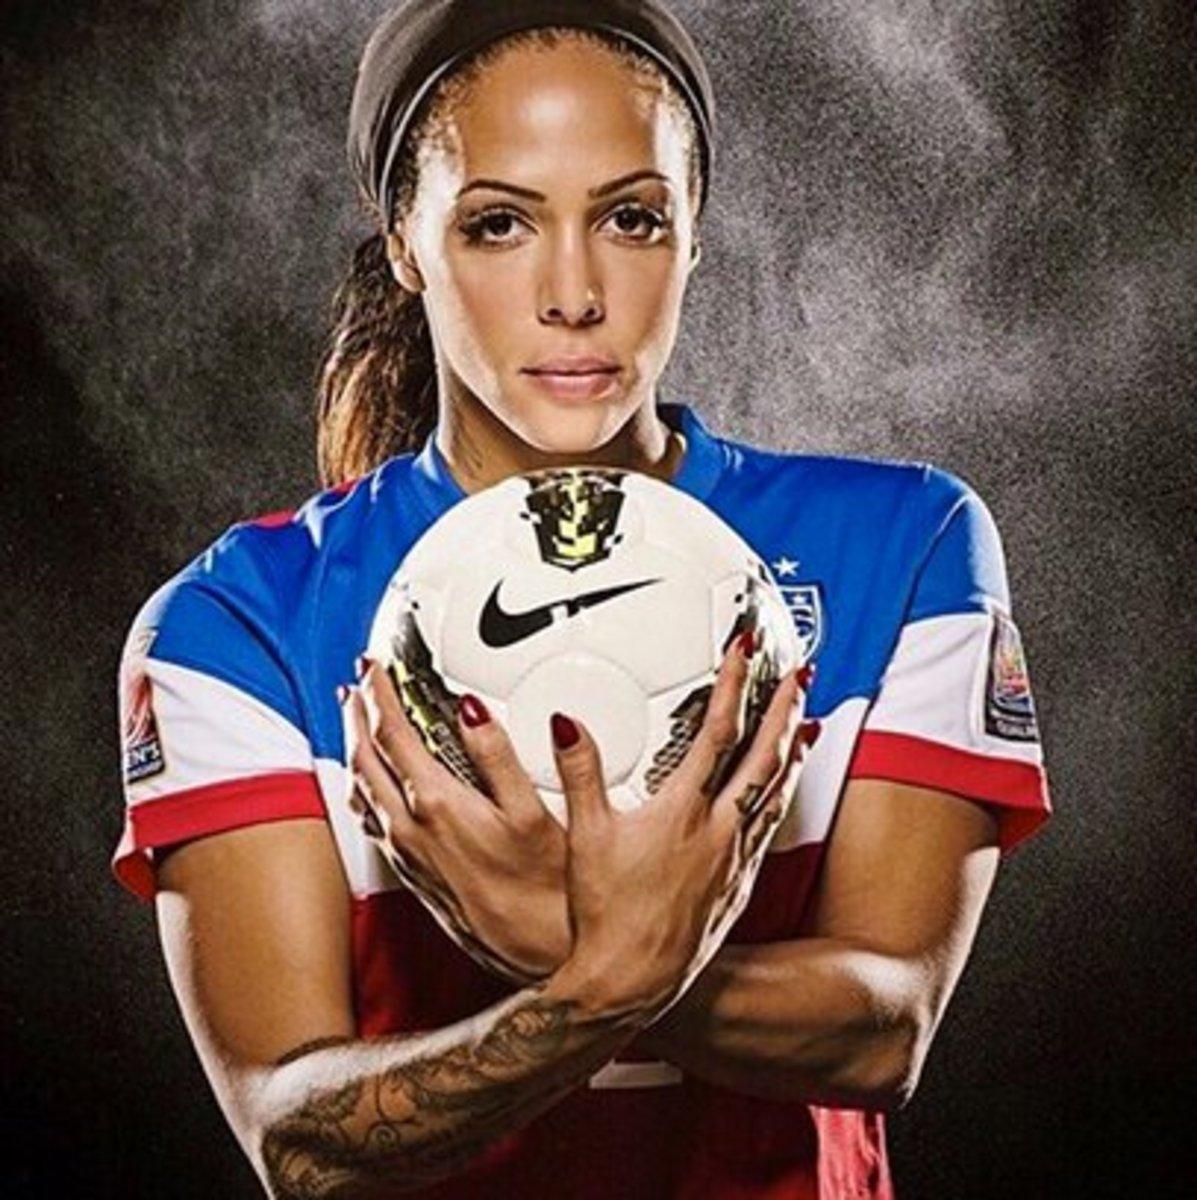 Hot Picture Of Sydney Leroux Which Will Make You Crave For Her